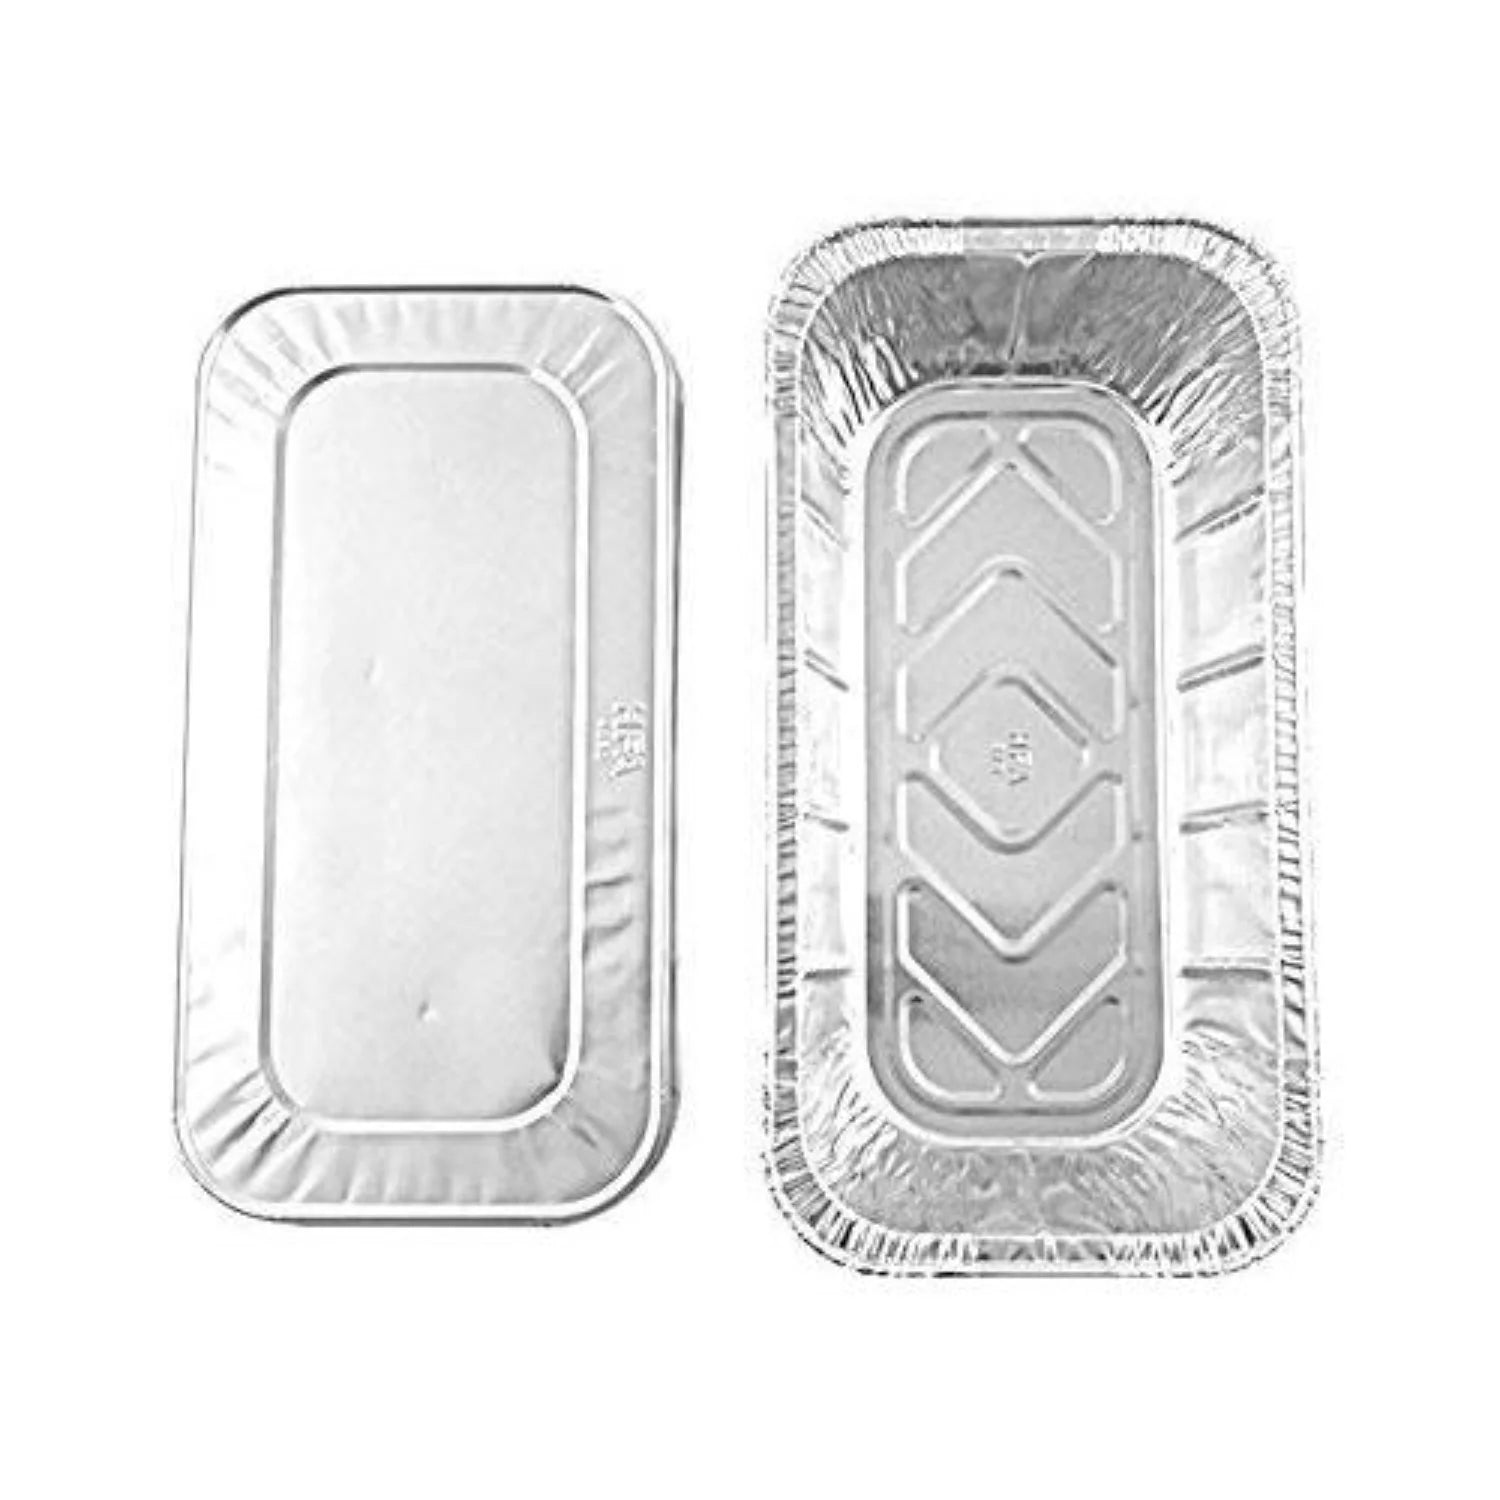 Nicole Home Collection 00602 Aluminum Loaf Pan, 1/3 size, 5 lb. Pack of 200